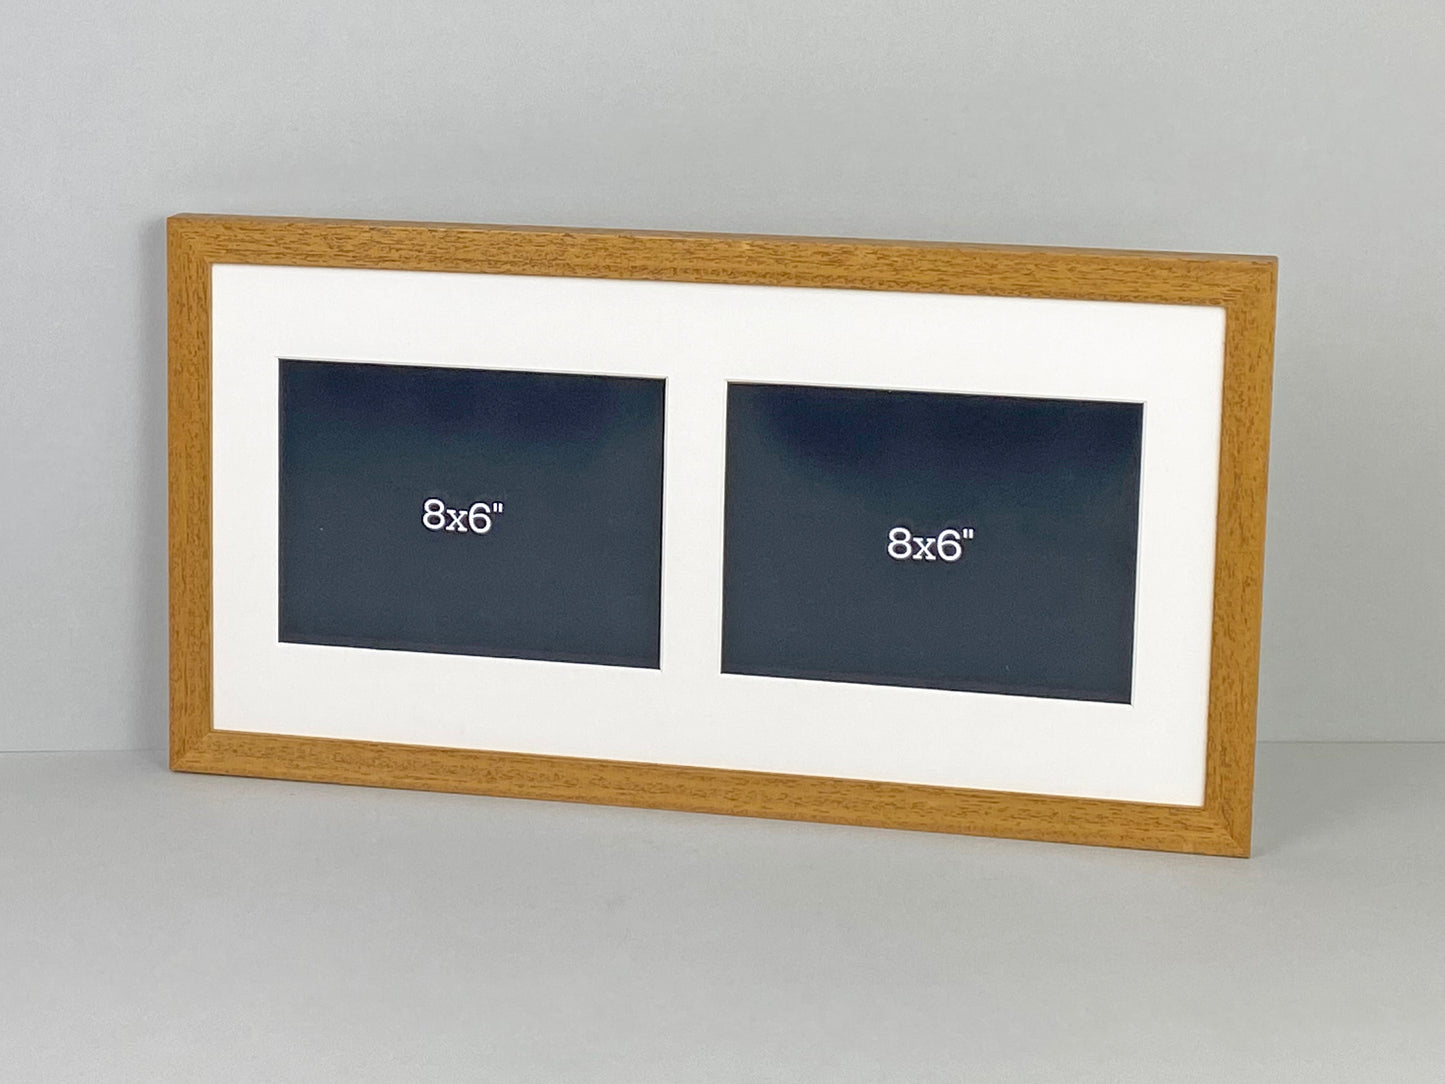 Suits Two 8x6" Photos. 25x50cm. Wooden Multi picture Frame